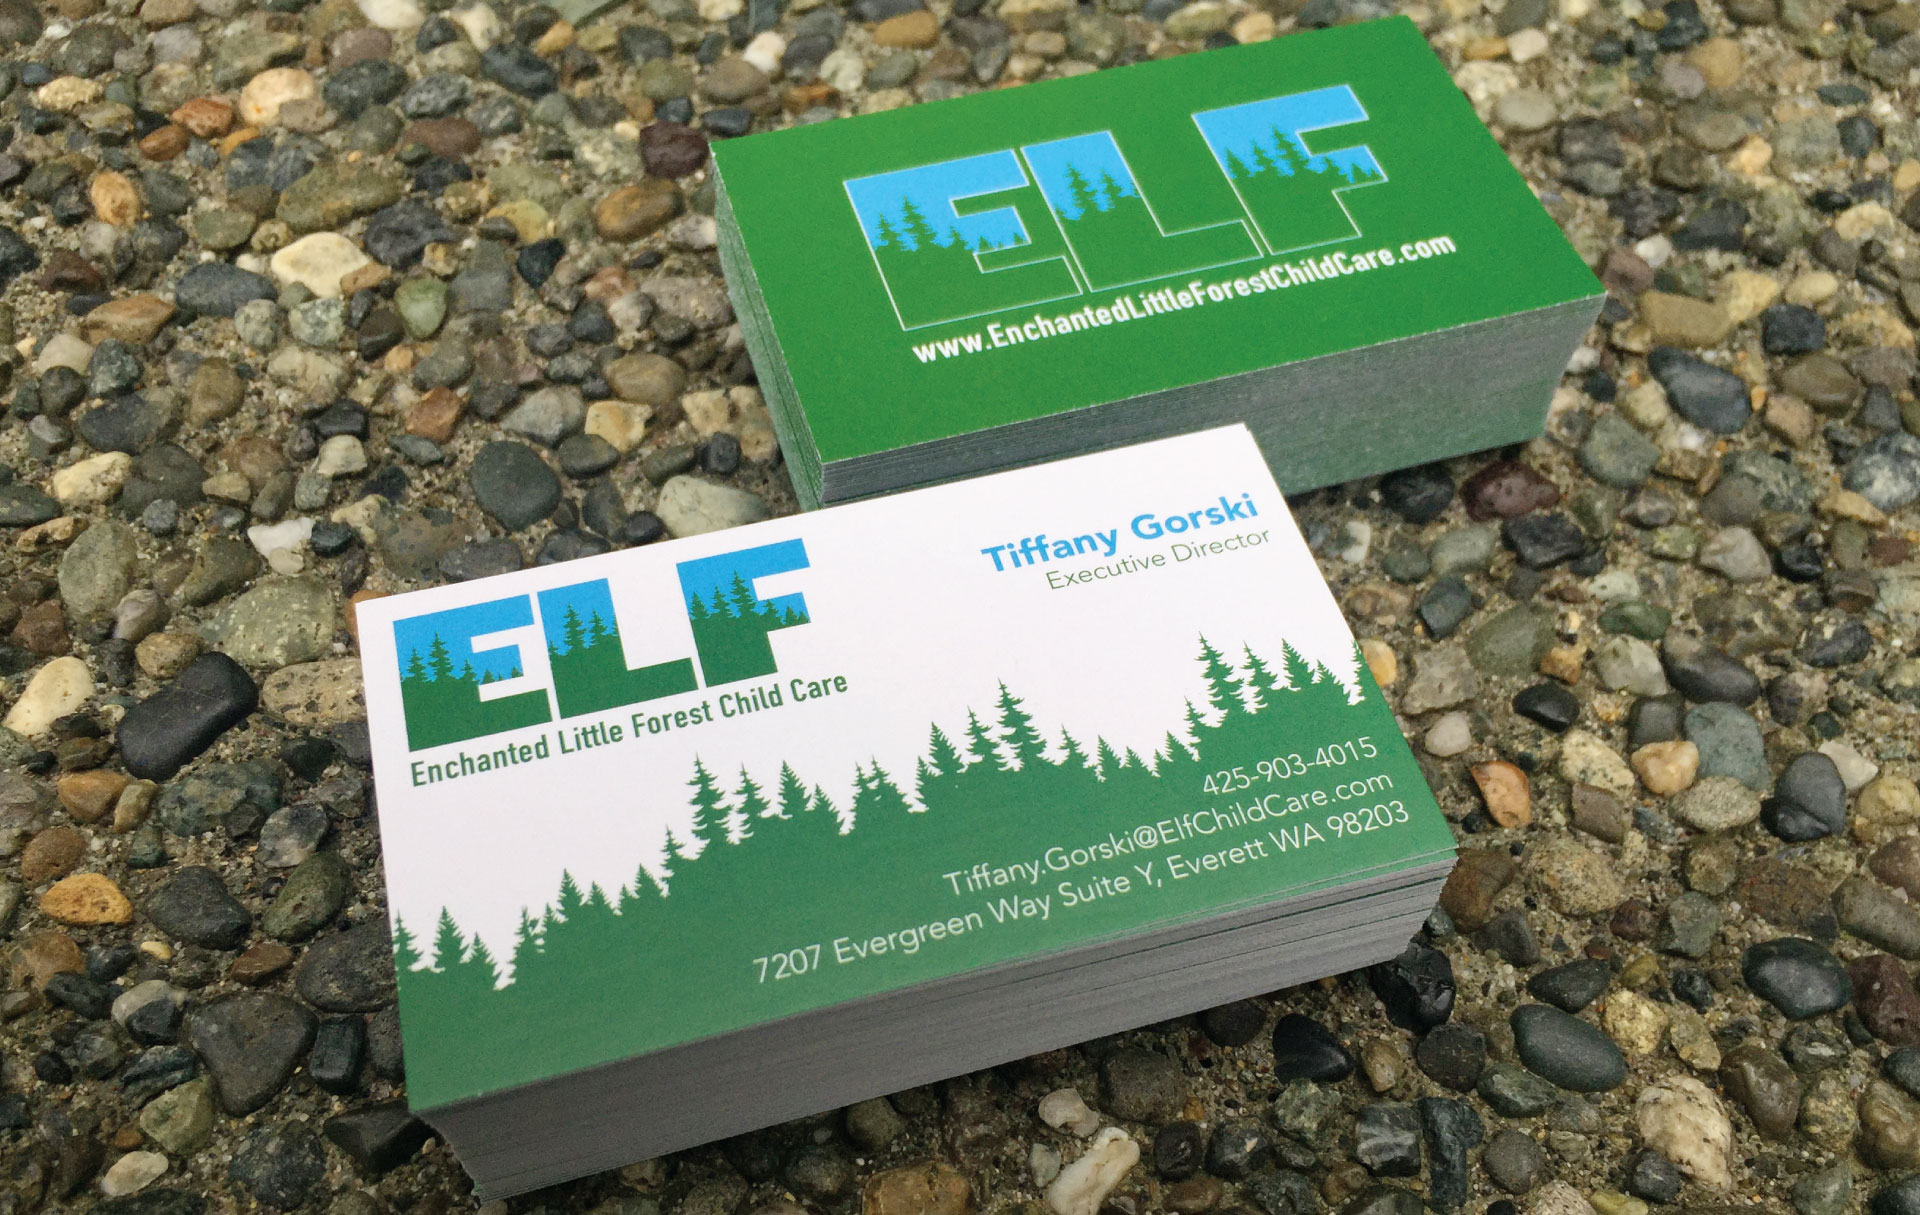 Enchanted Little Forest Childcare Logo designed by Ontra Marketing Group